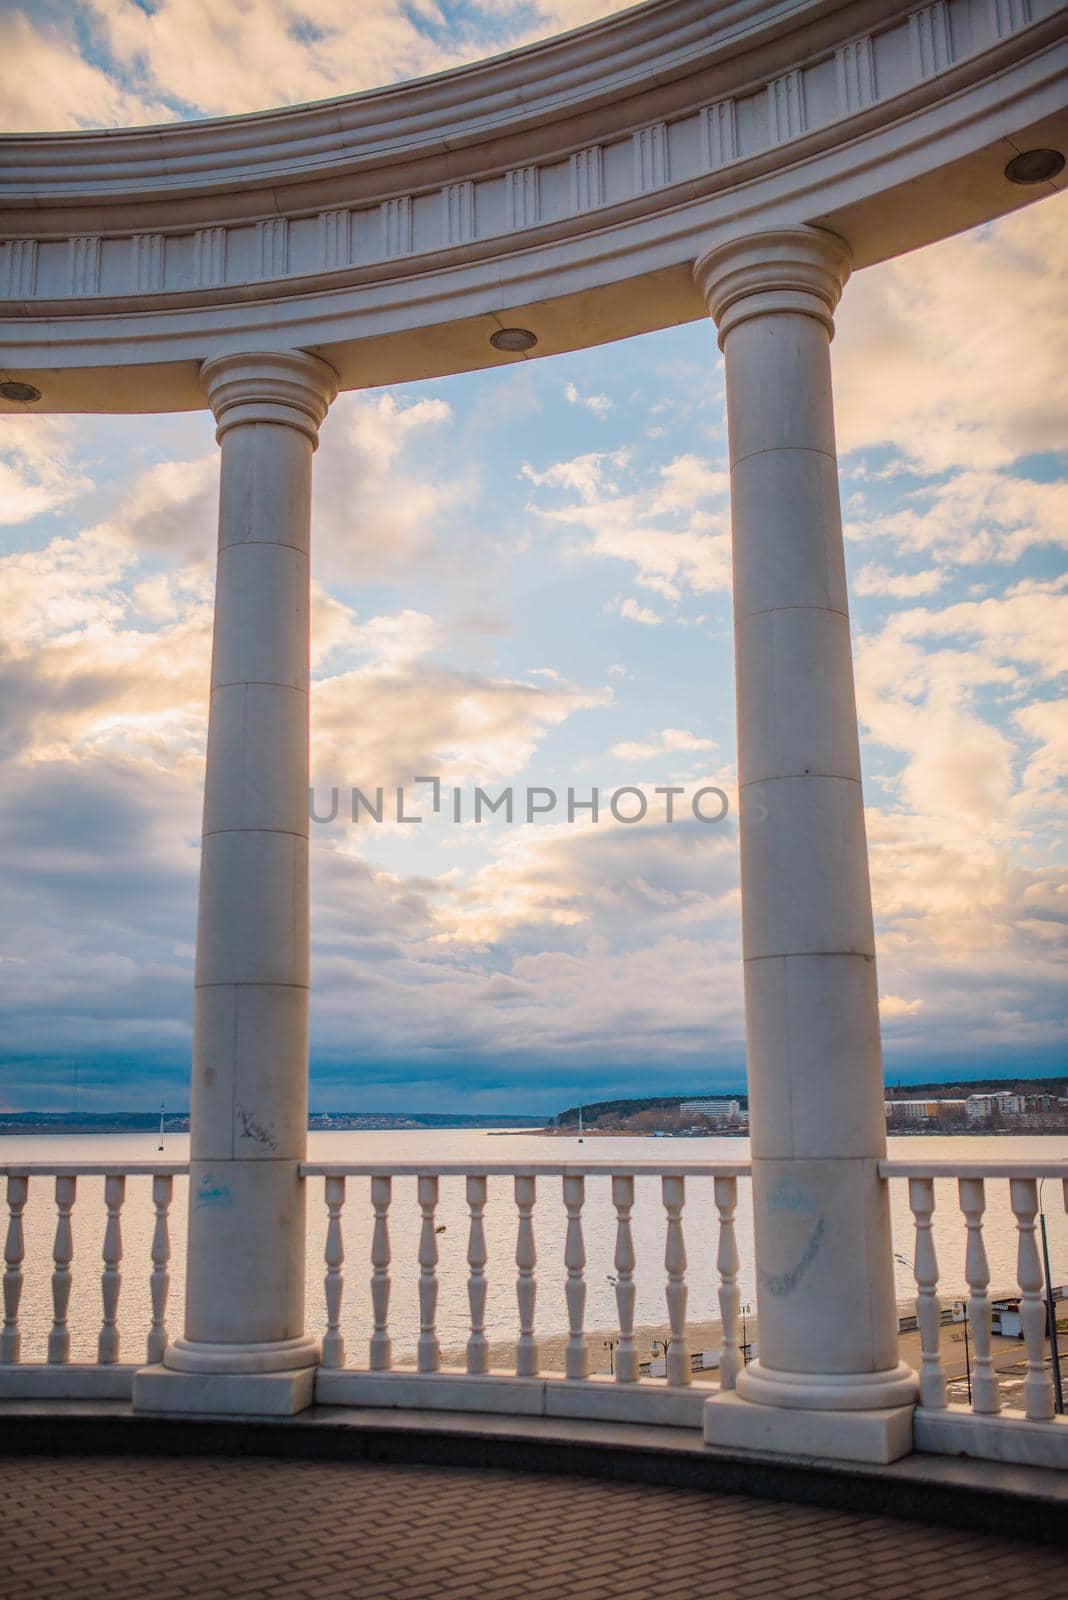 beautiful white columns overlooking the lake. Architecture of the city in Russia.